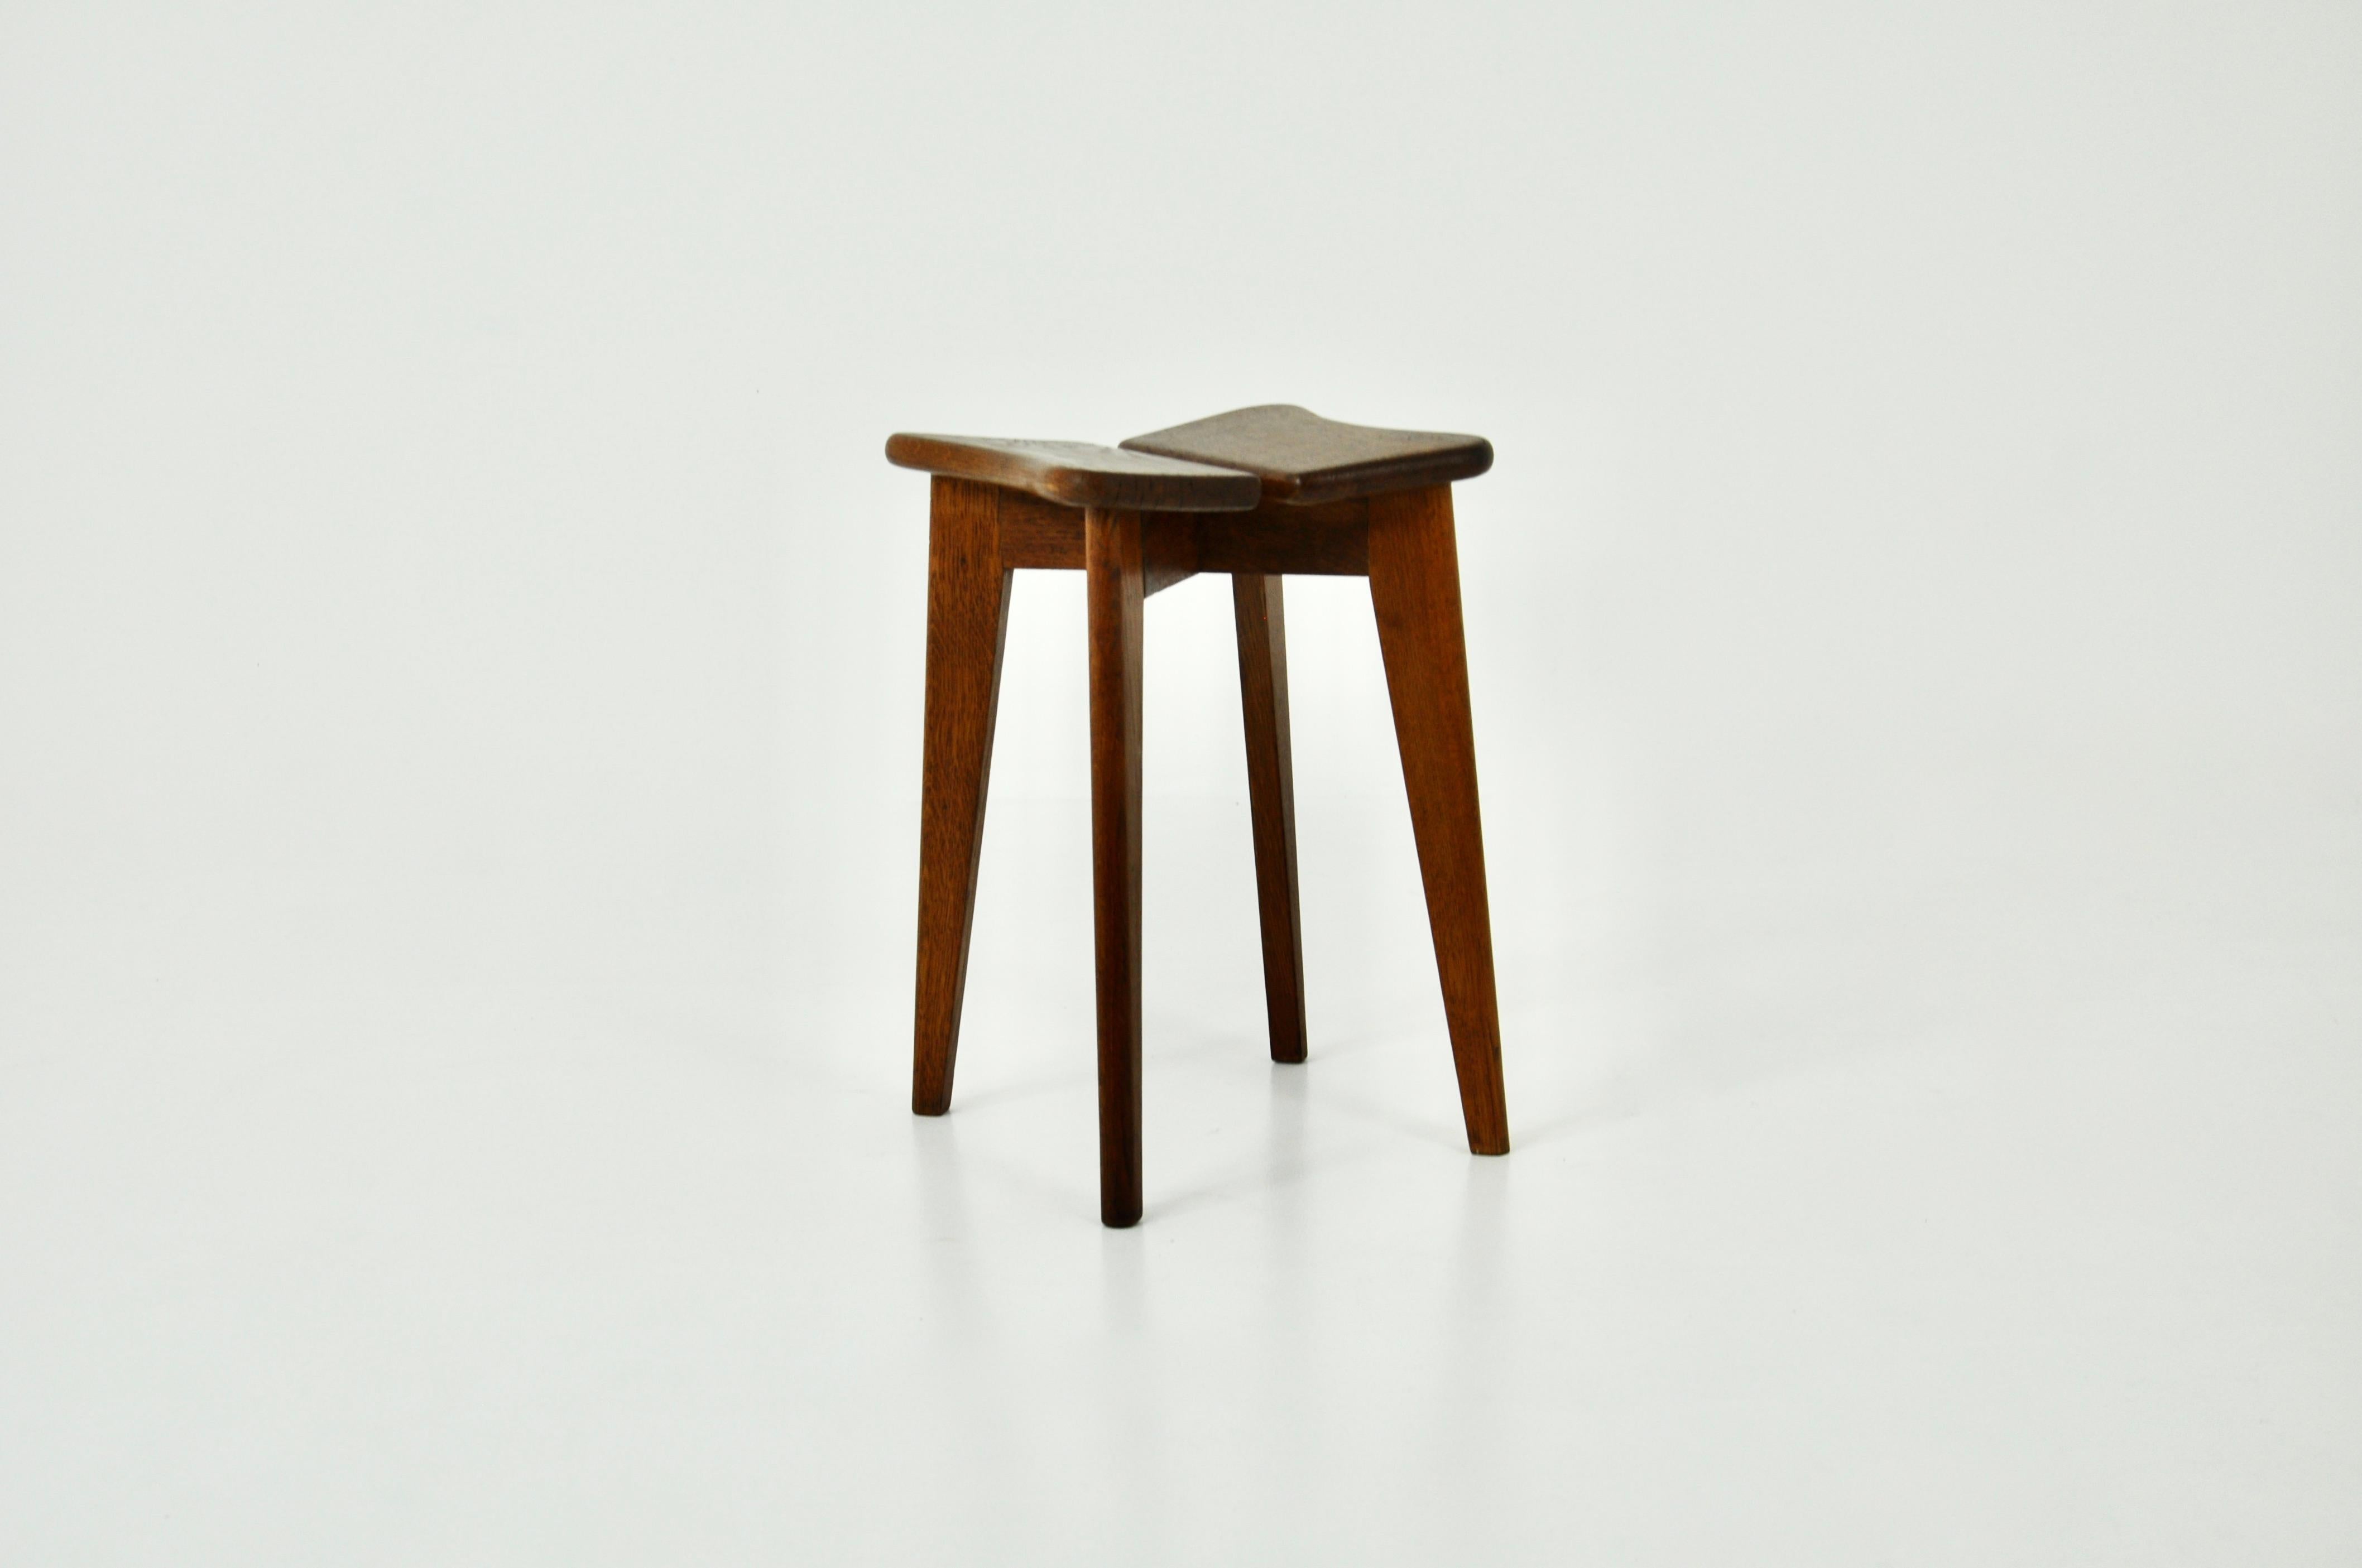 Wooden stool by Marcel Gascoin. Wear due to time and age of the stool.